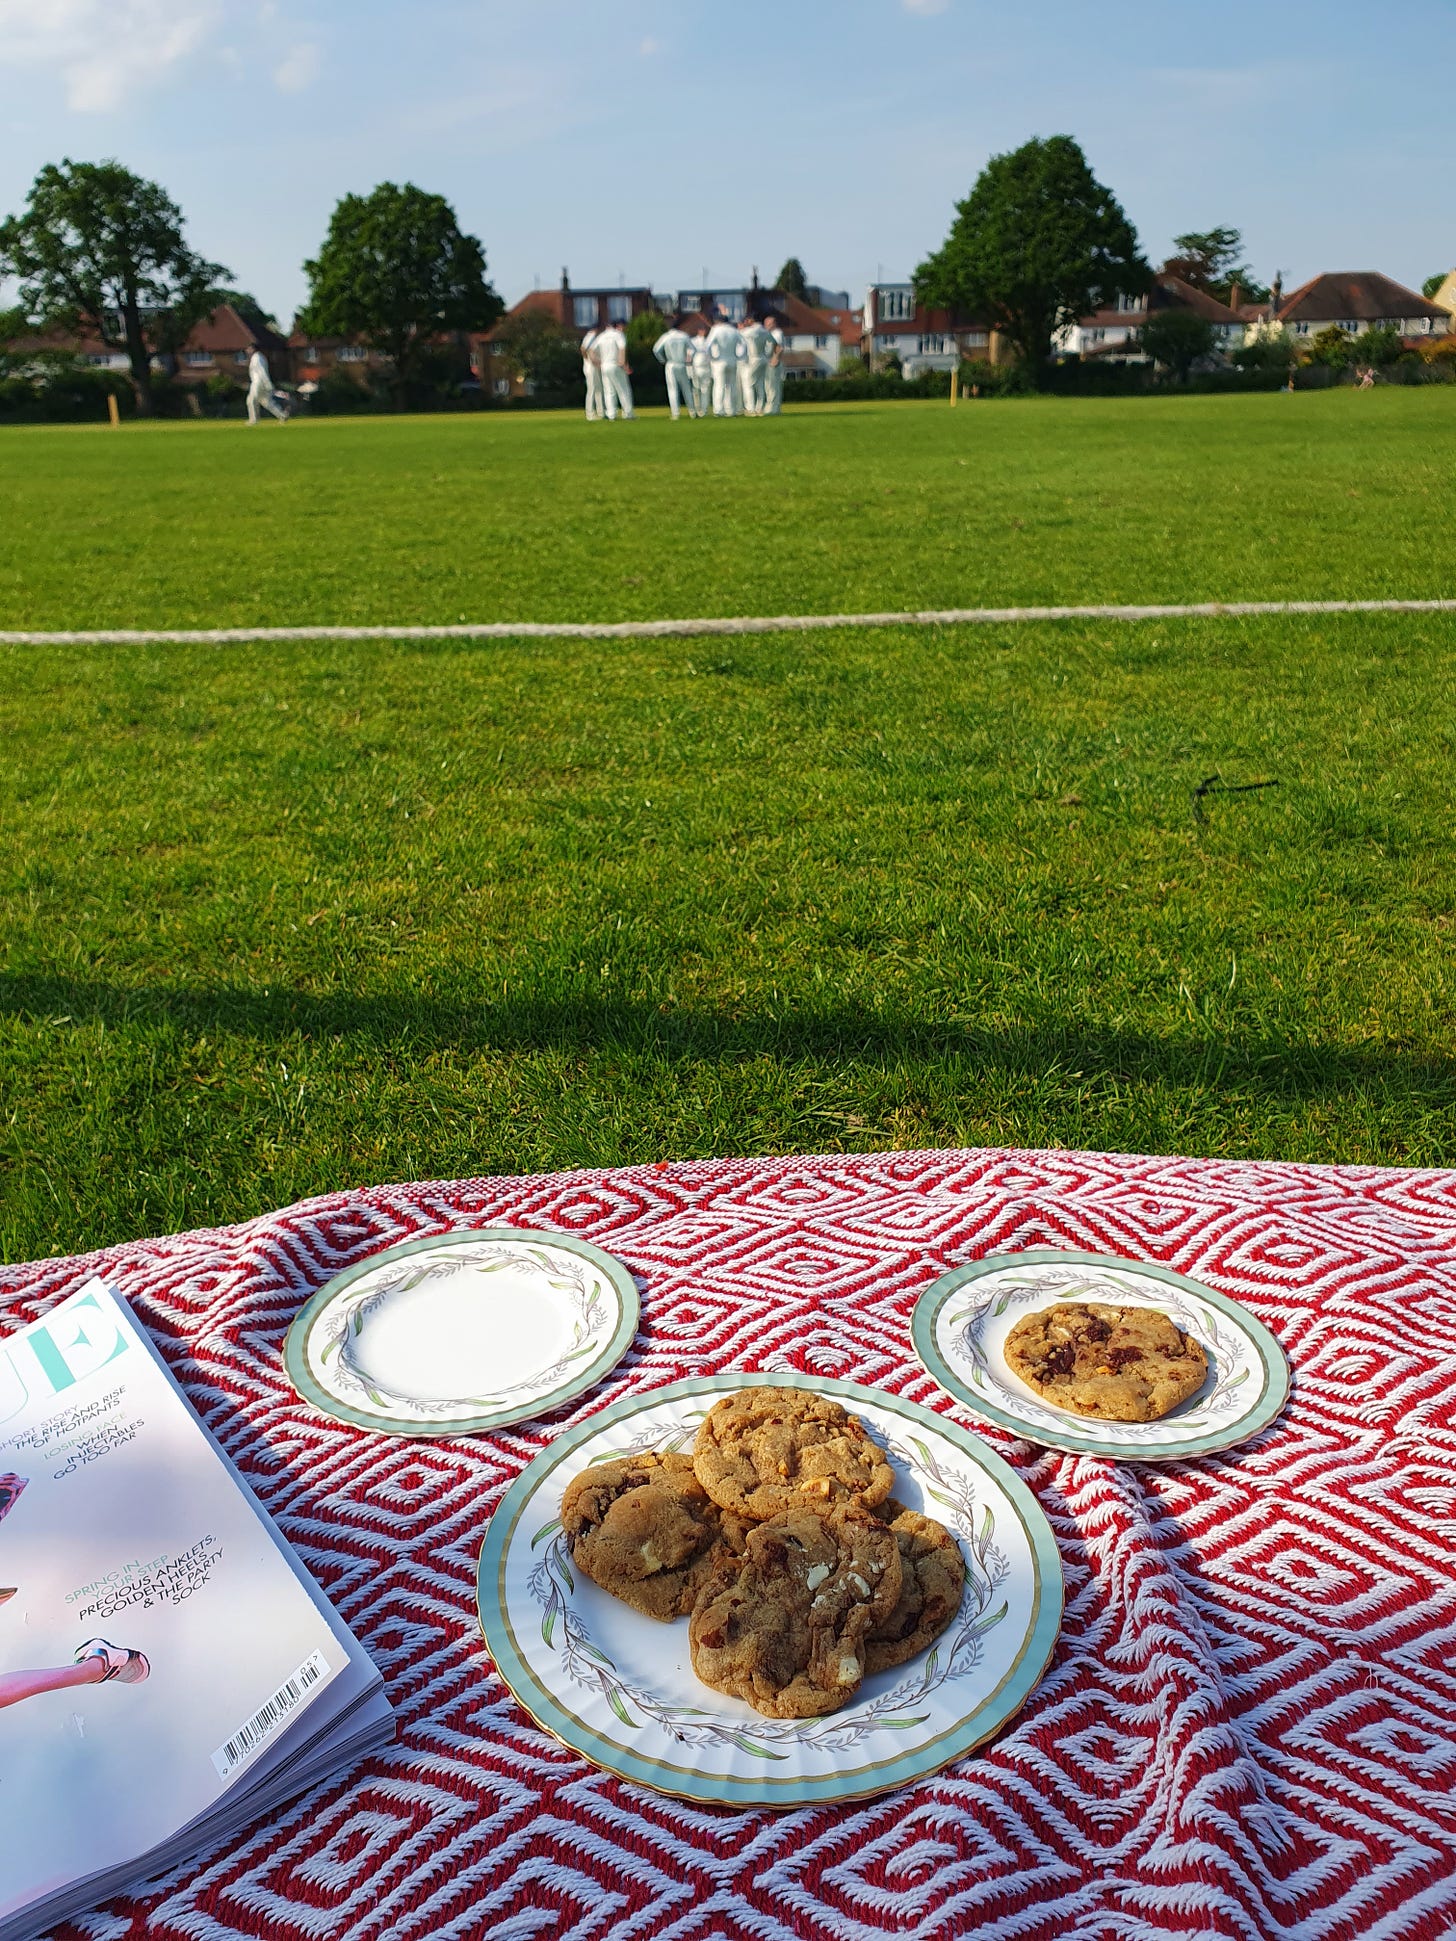 A plate of biscuits and a magazine are on a patterned rug on a bright sunny day, in the distance are cricket players in their whites